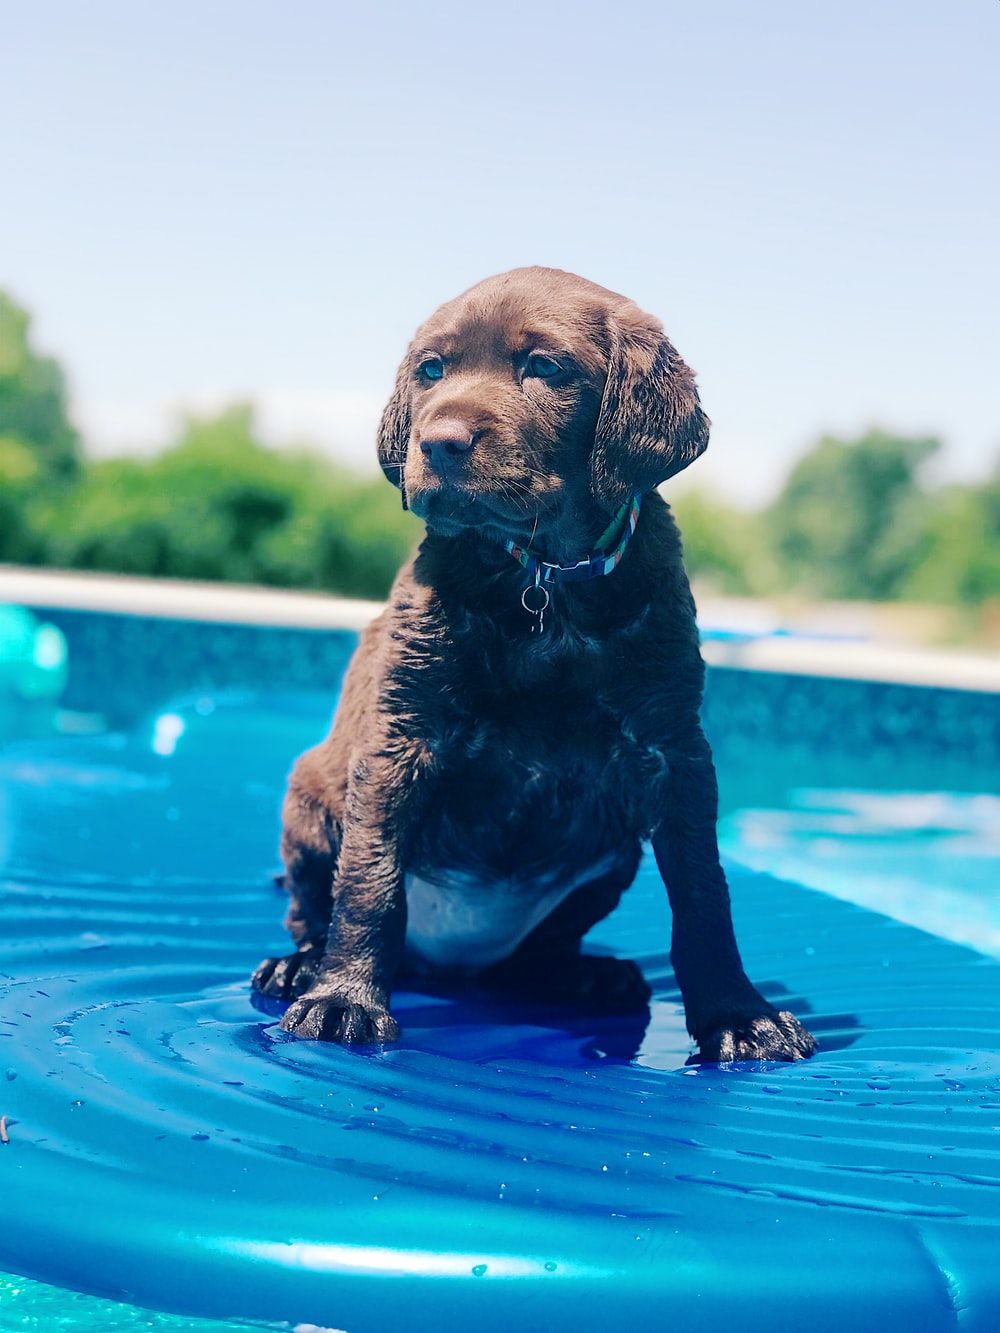 Chocolate Labrador Picture. Download Free Image